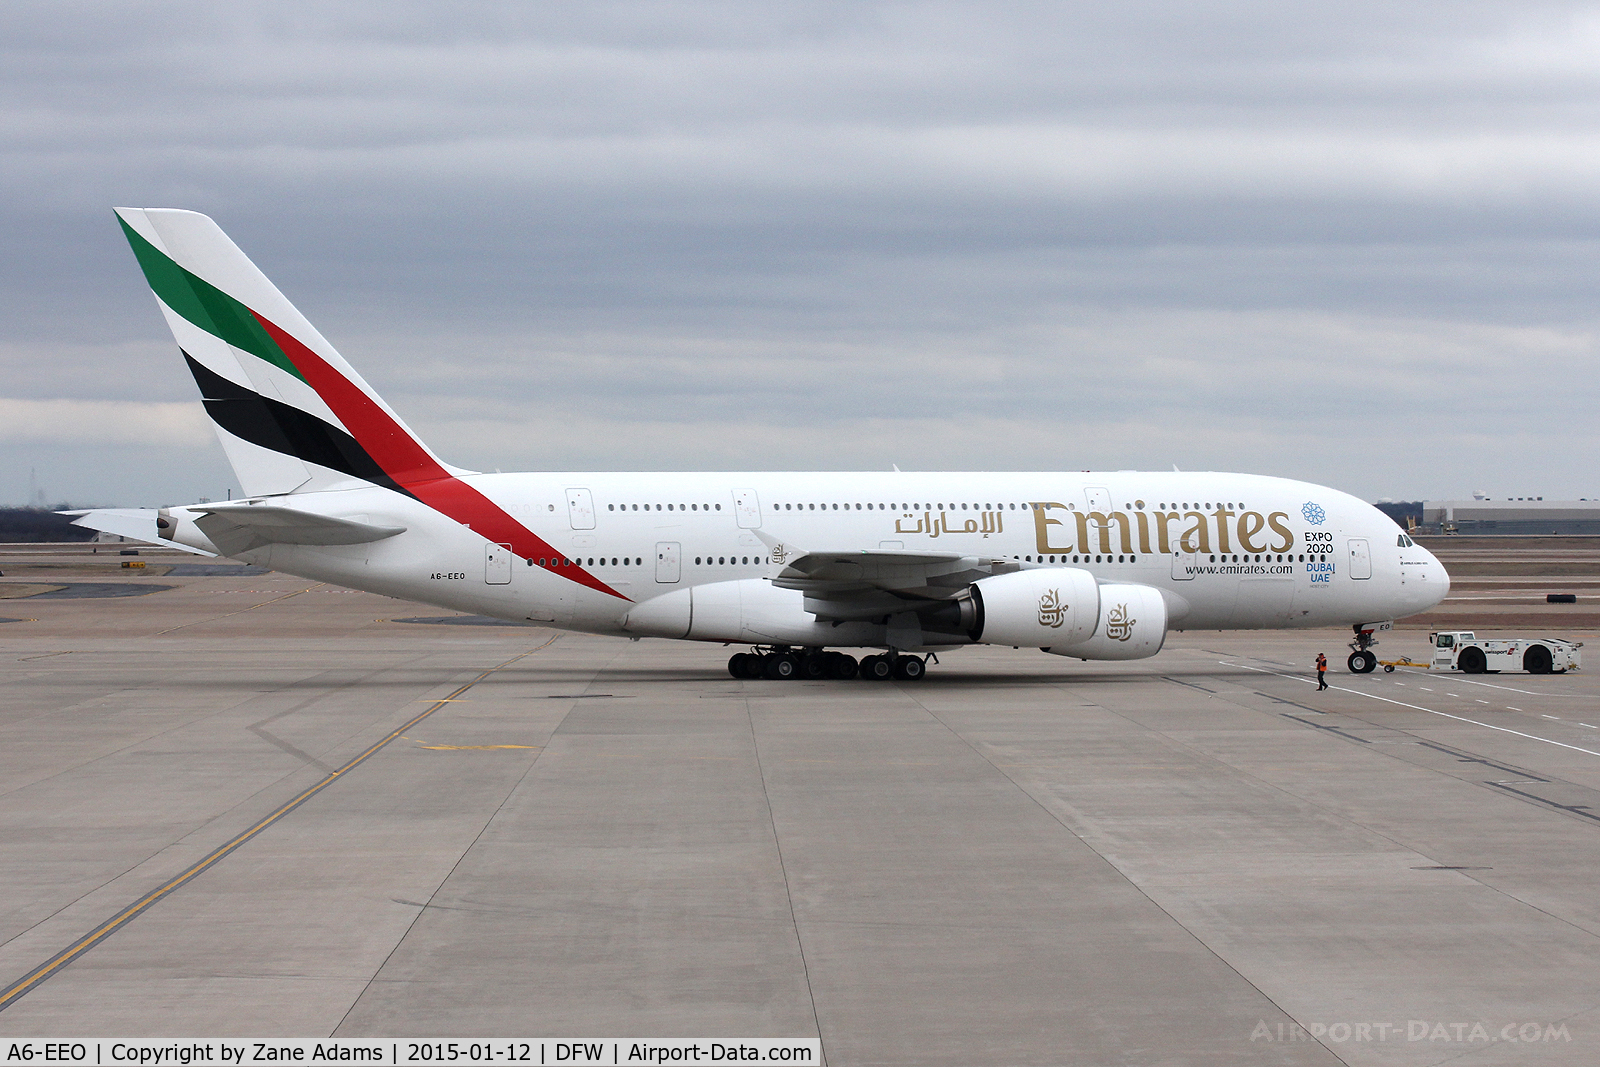 A6-EEO, 2013 Airbus A380-861 C/N 136, At DFW Airport